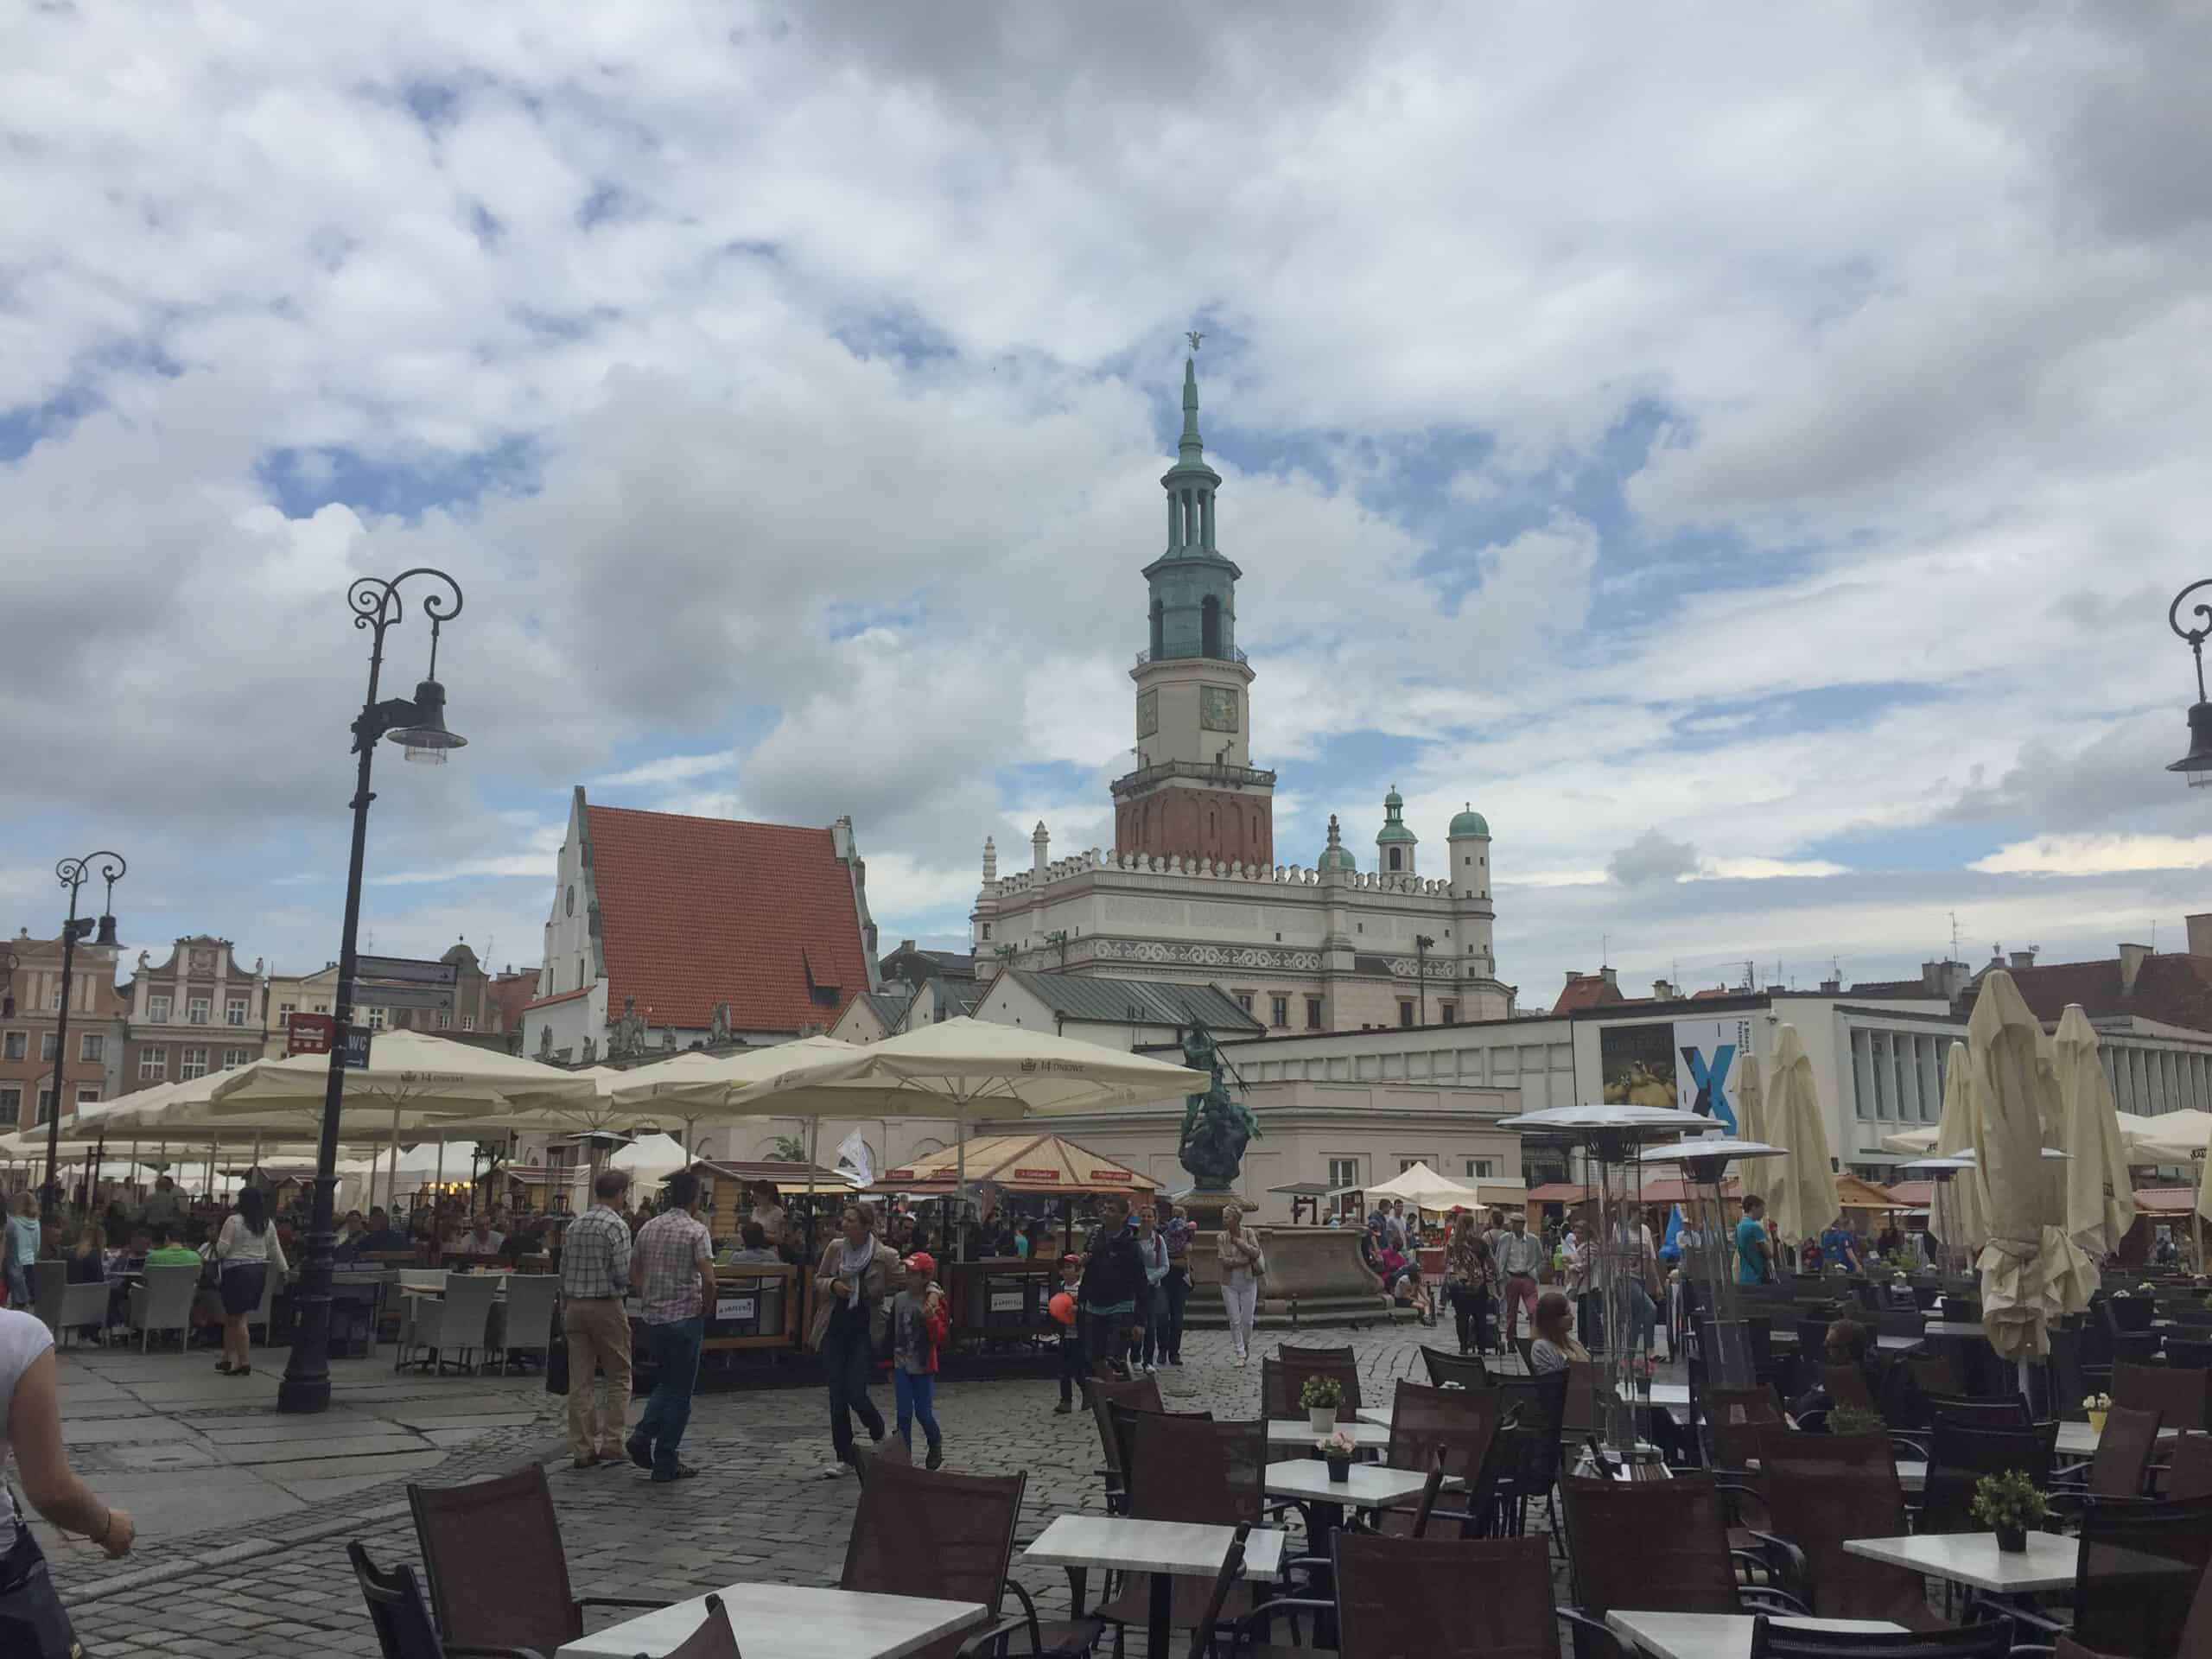 Market Square in Poznan Poland as discussed on The Places Where We Go podcast